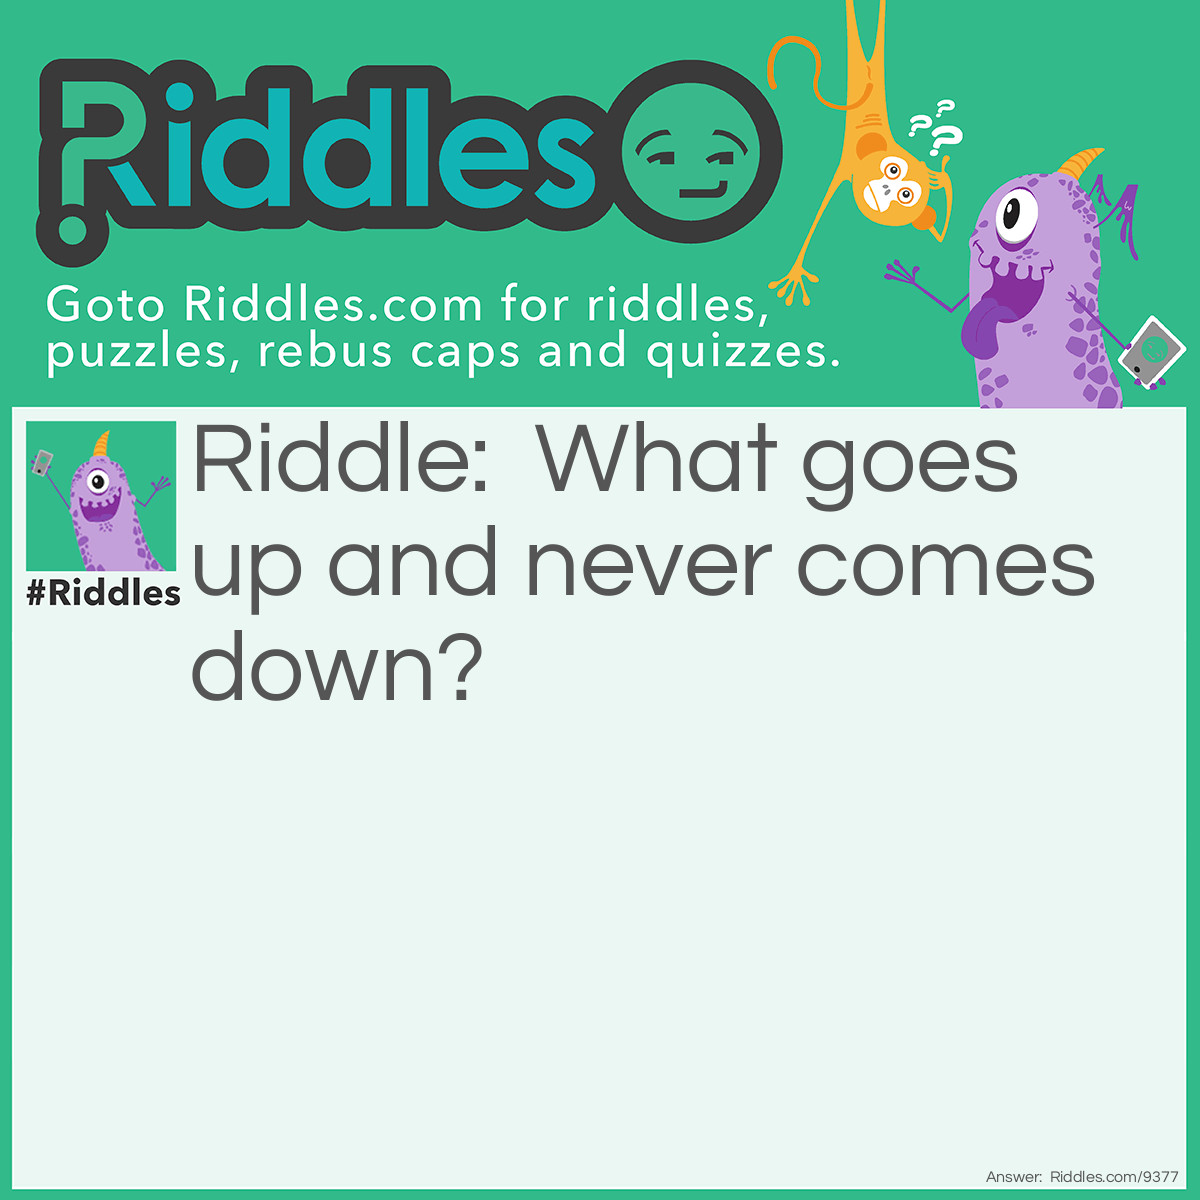 Riddle: What goes up and never comes down? Answer: Age.